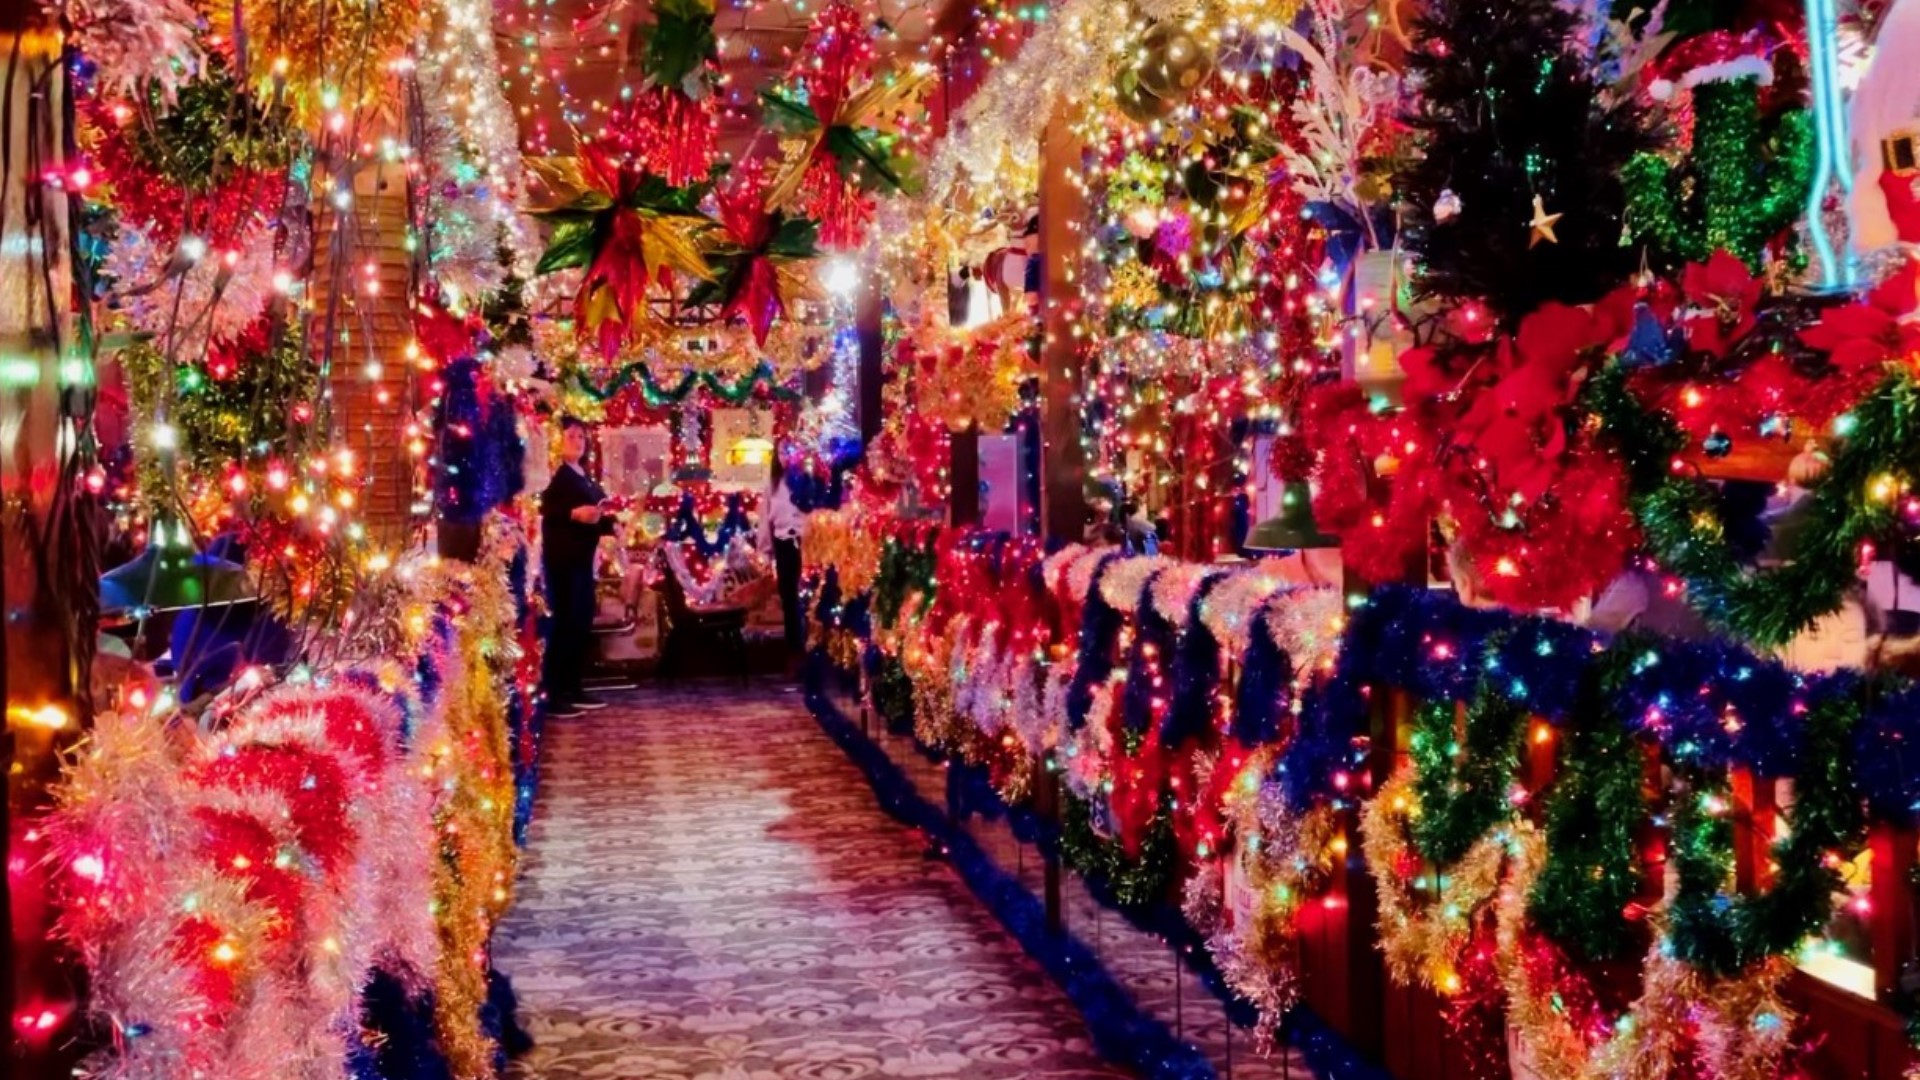 Campo Verde, a Tex-Mex restaurant in Arlington, has floor-to-ceiling Christmas decorations. People wait hours to experience the dazzling lights.